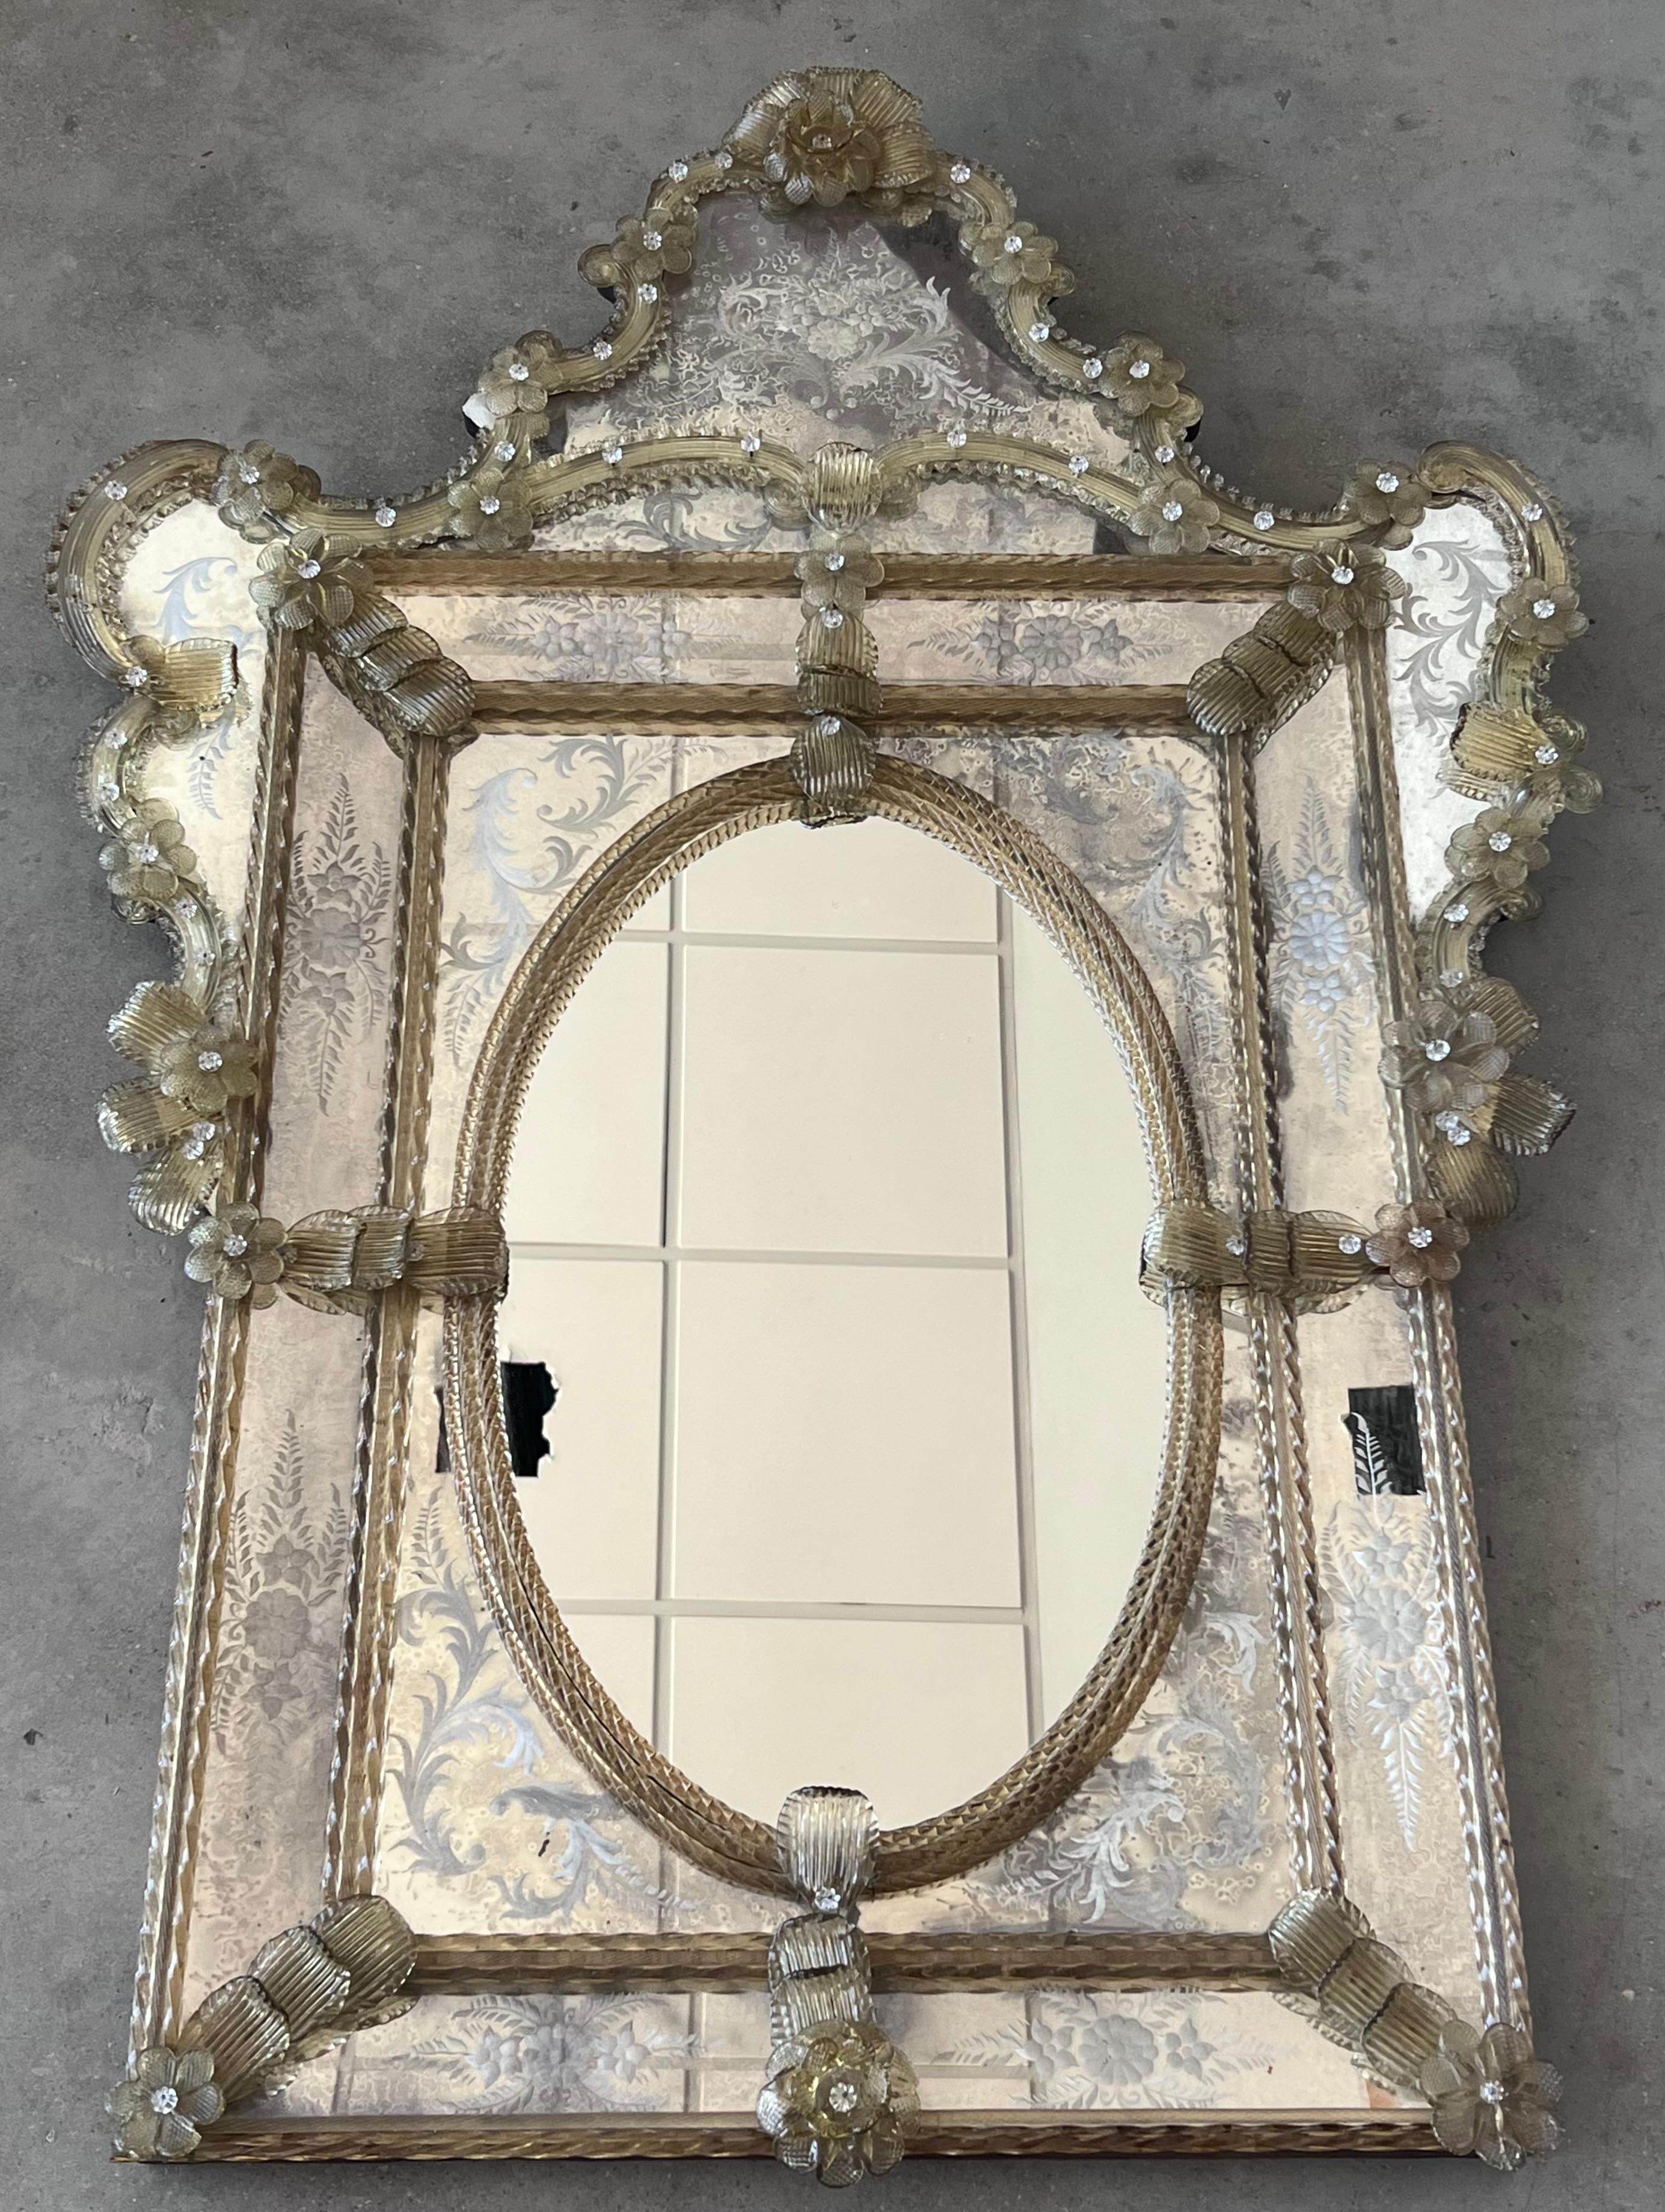 The crest top Venetian mirror. With its beveled panels and carved crest topped with a lovely lotus flower-like motif, the crest top mirror has been handmade and hand silvered. The central panel shows a light antiquing finish while the surround has a